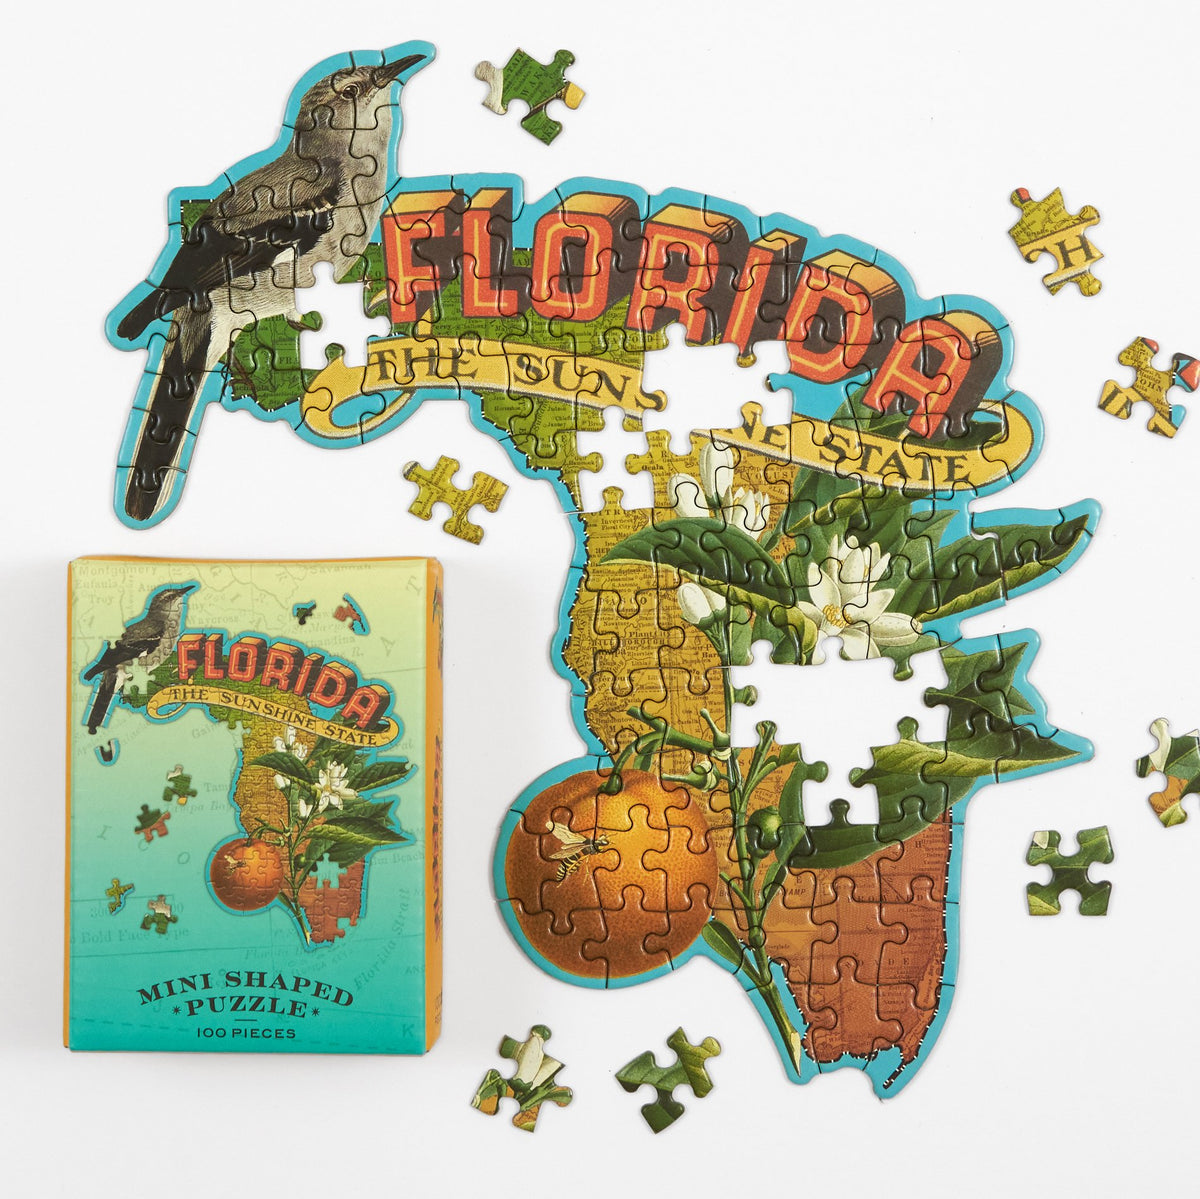 Florida Mini Shaped Jigsaw Puzzle 100 Piece Puzzles Wendy Gold 